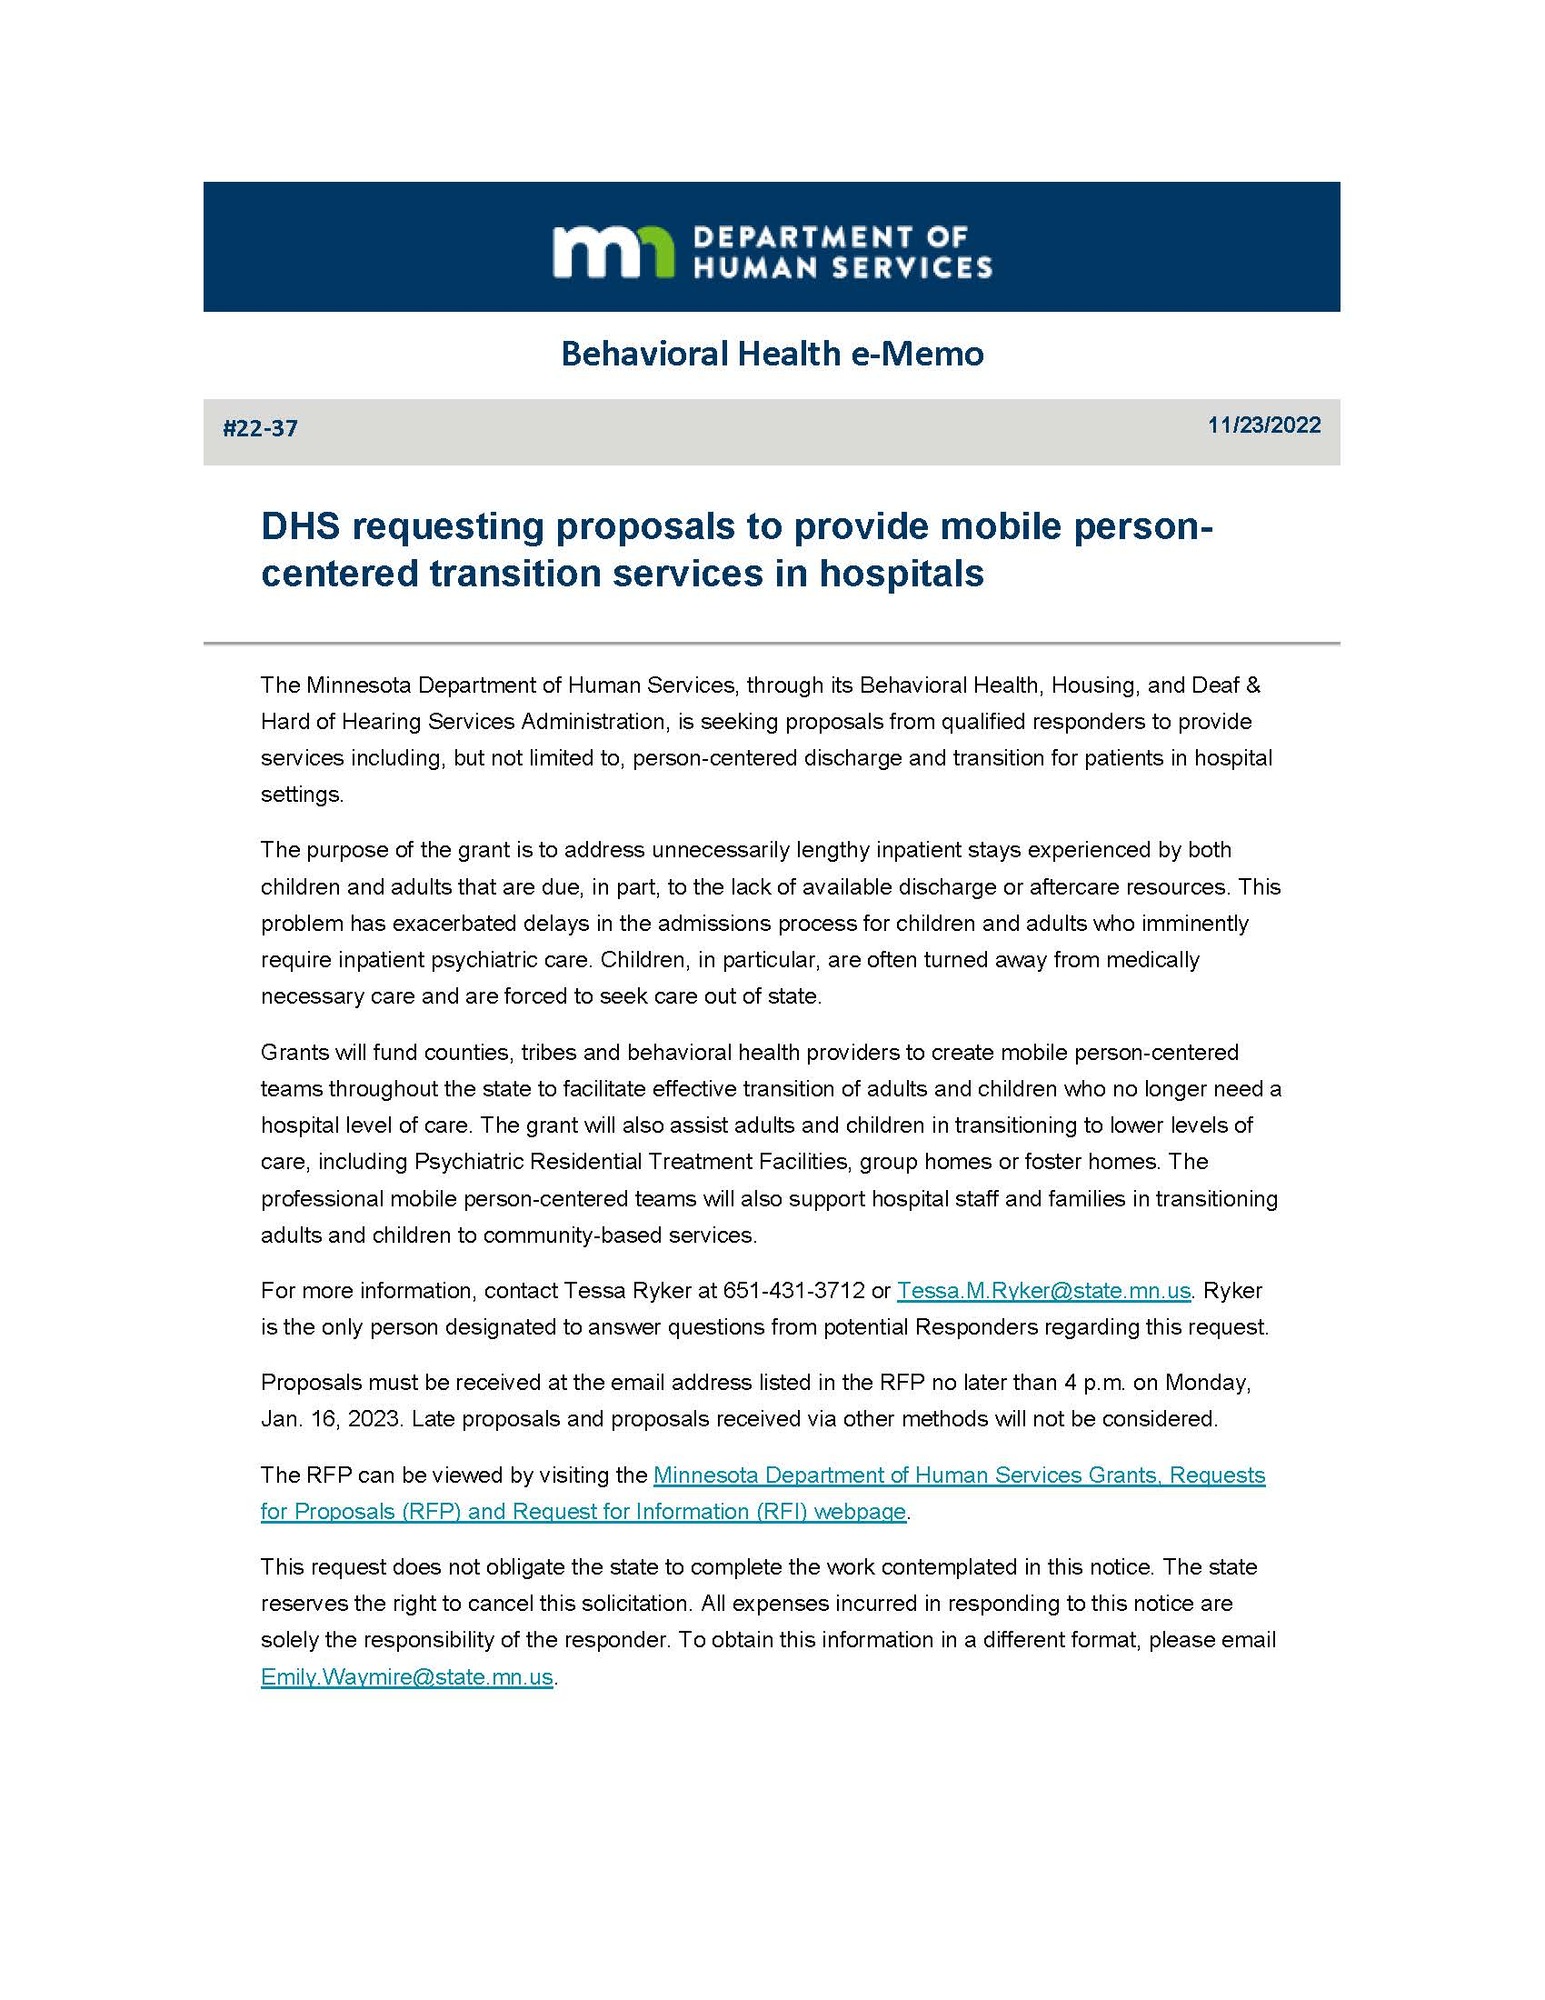 DHS Requesting Proposals mobile